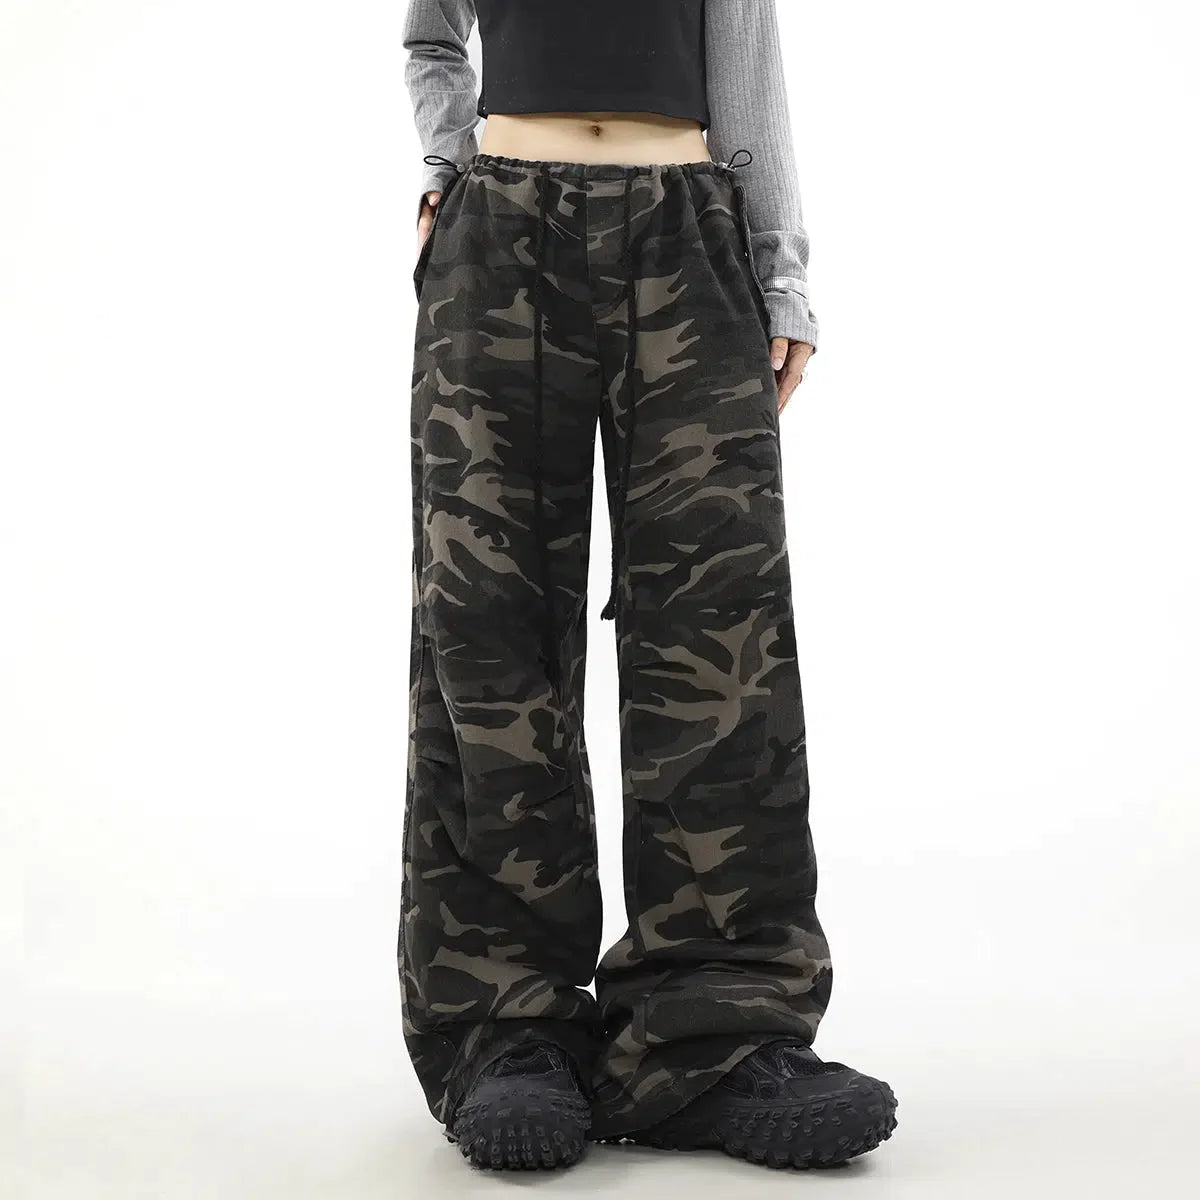 Drawstring Camouflage Casual Pants Korean Street Fashion Pants By Mr Nearly Shop Online at OH Vault